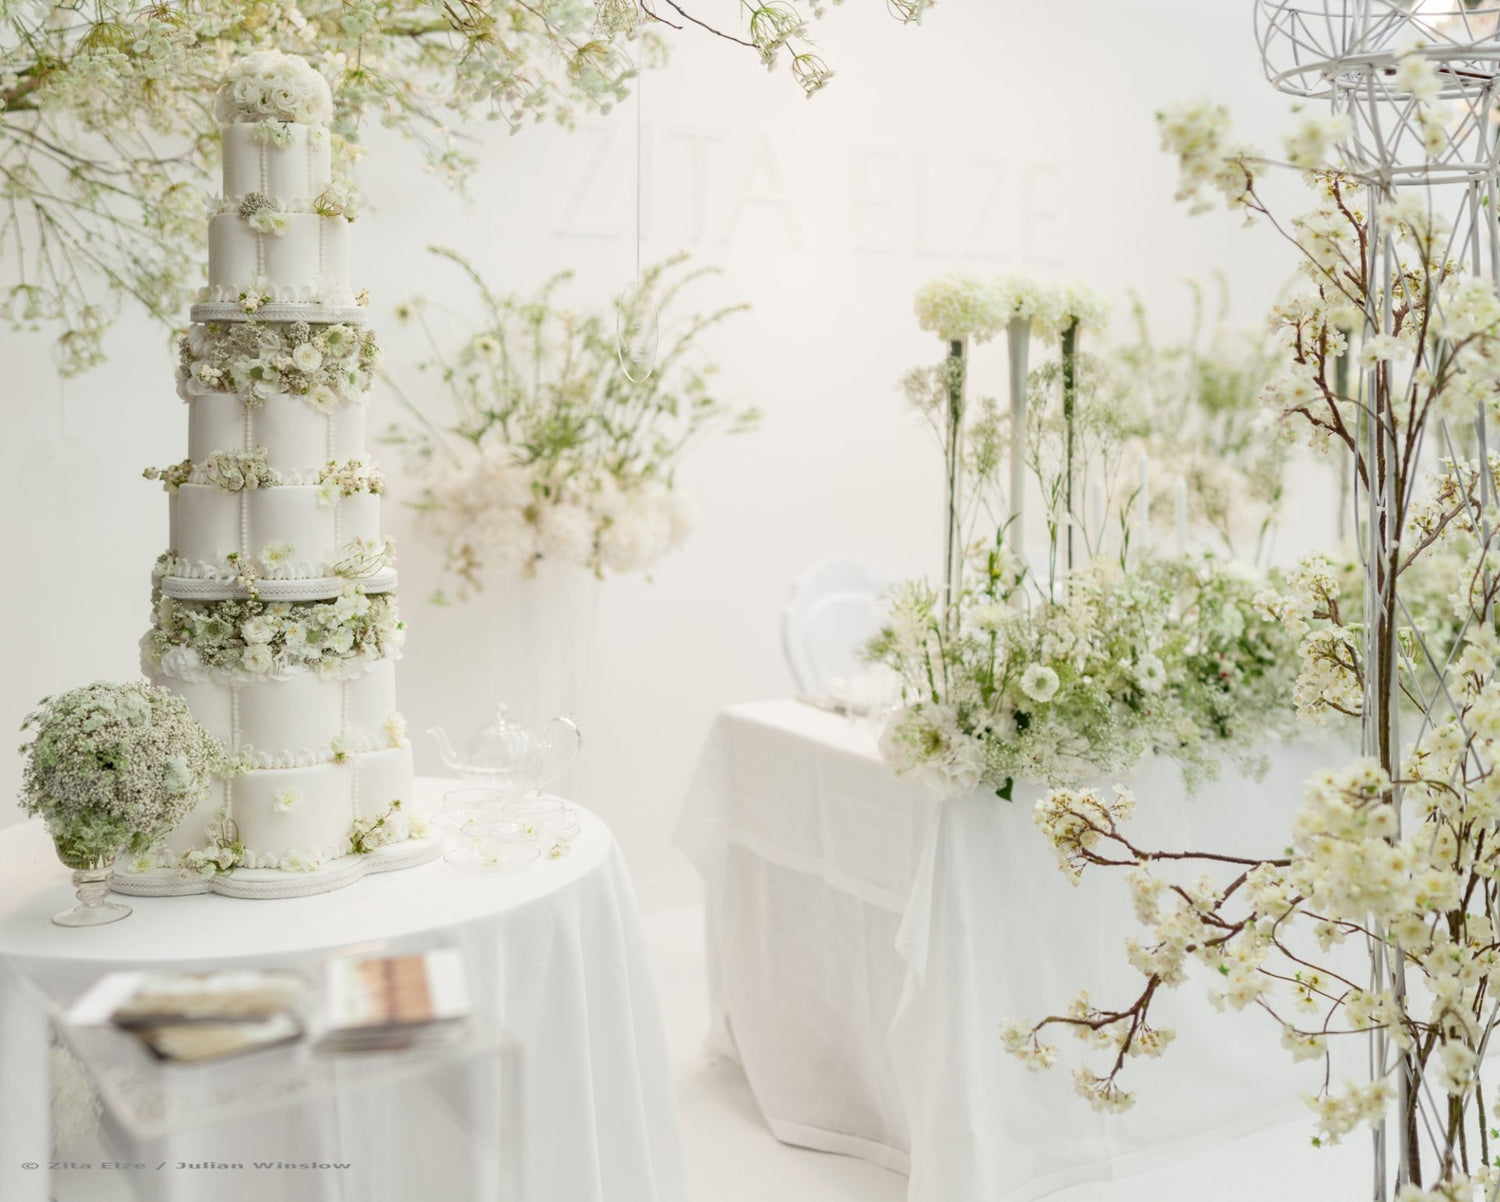 All white wedding setting with wedding cake and flower arrangement